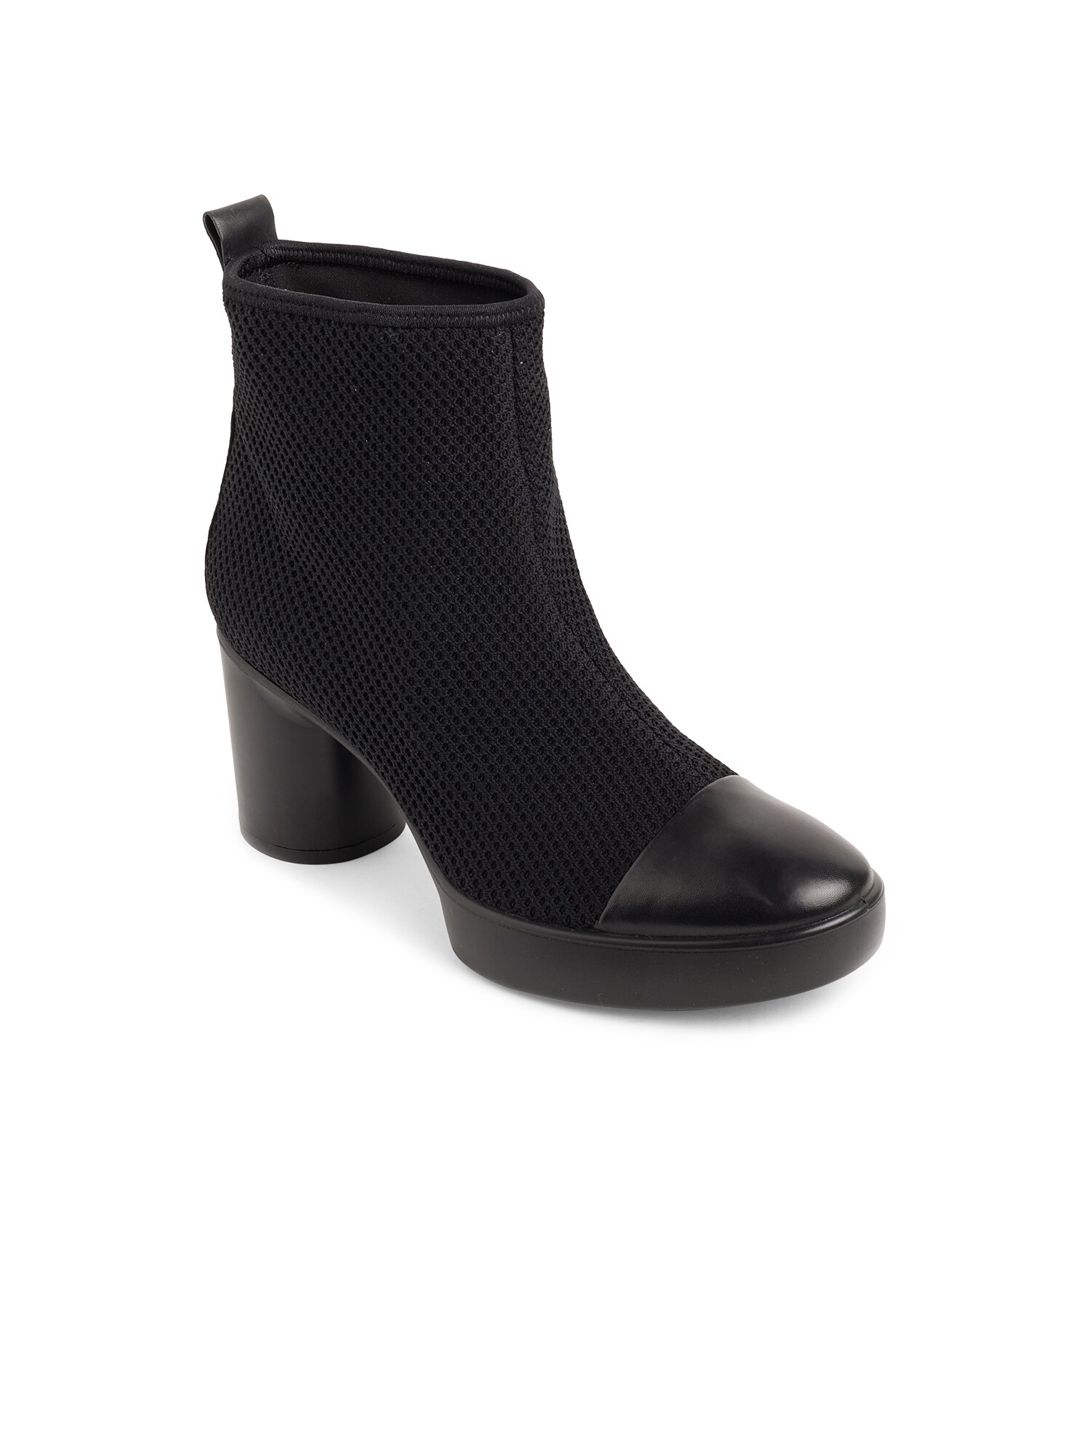 ECCO Women Black Contemporary Formal Heeled Boots Price in India